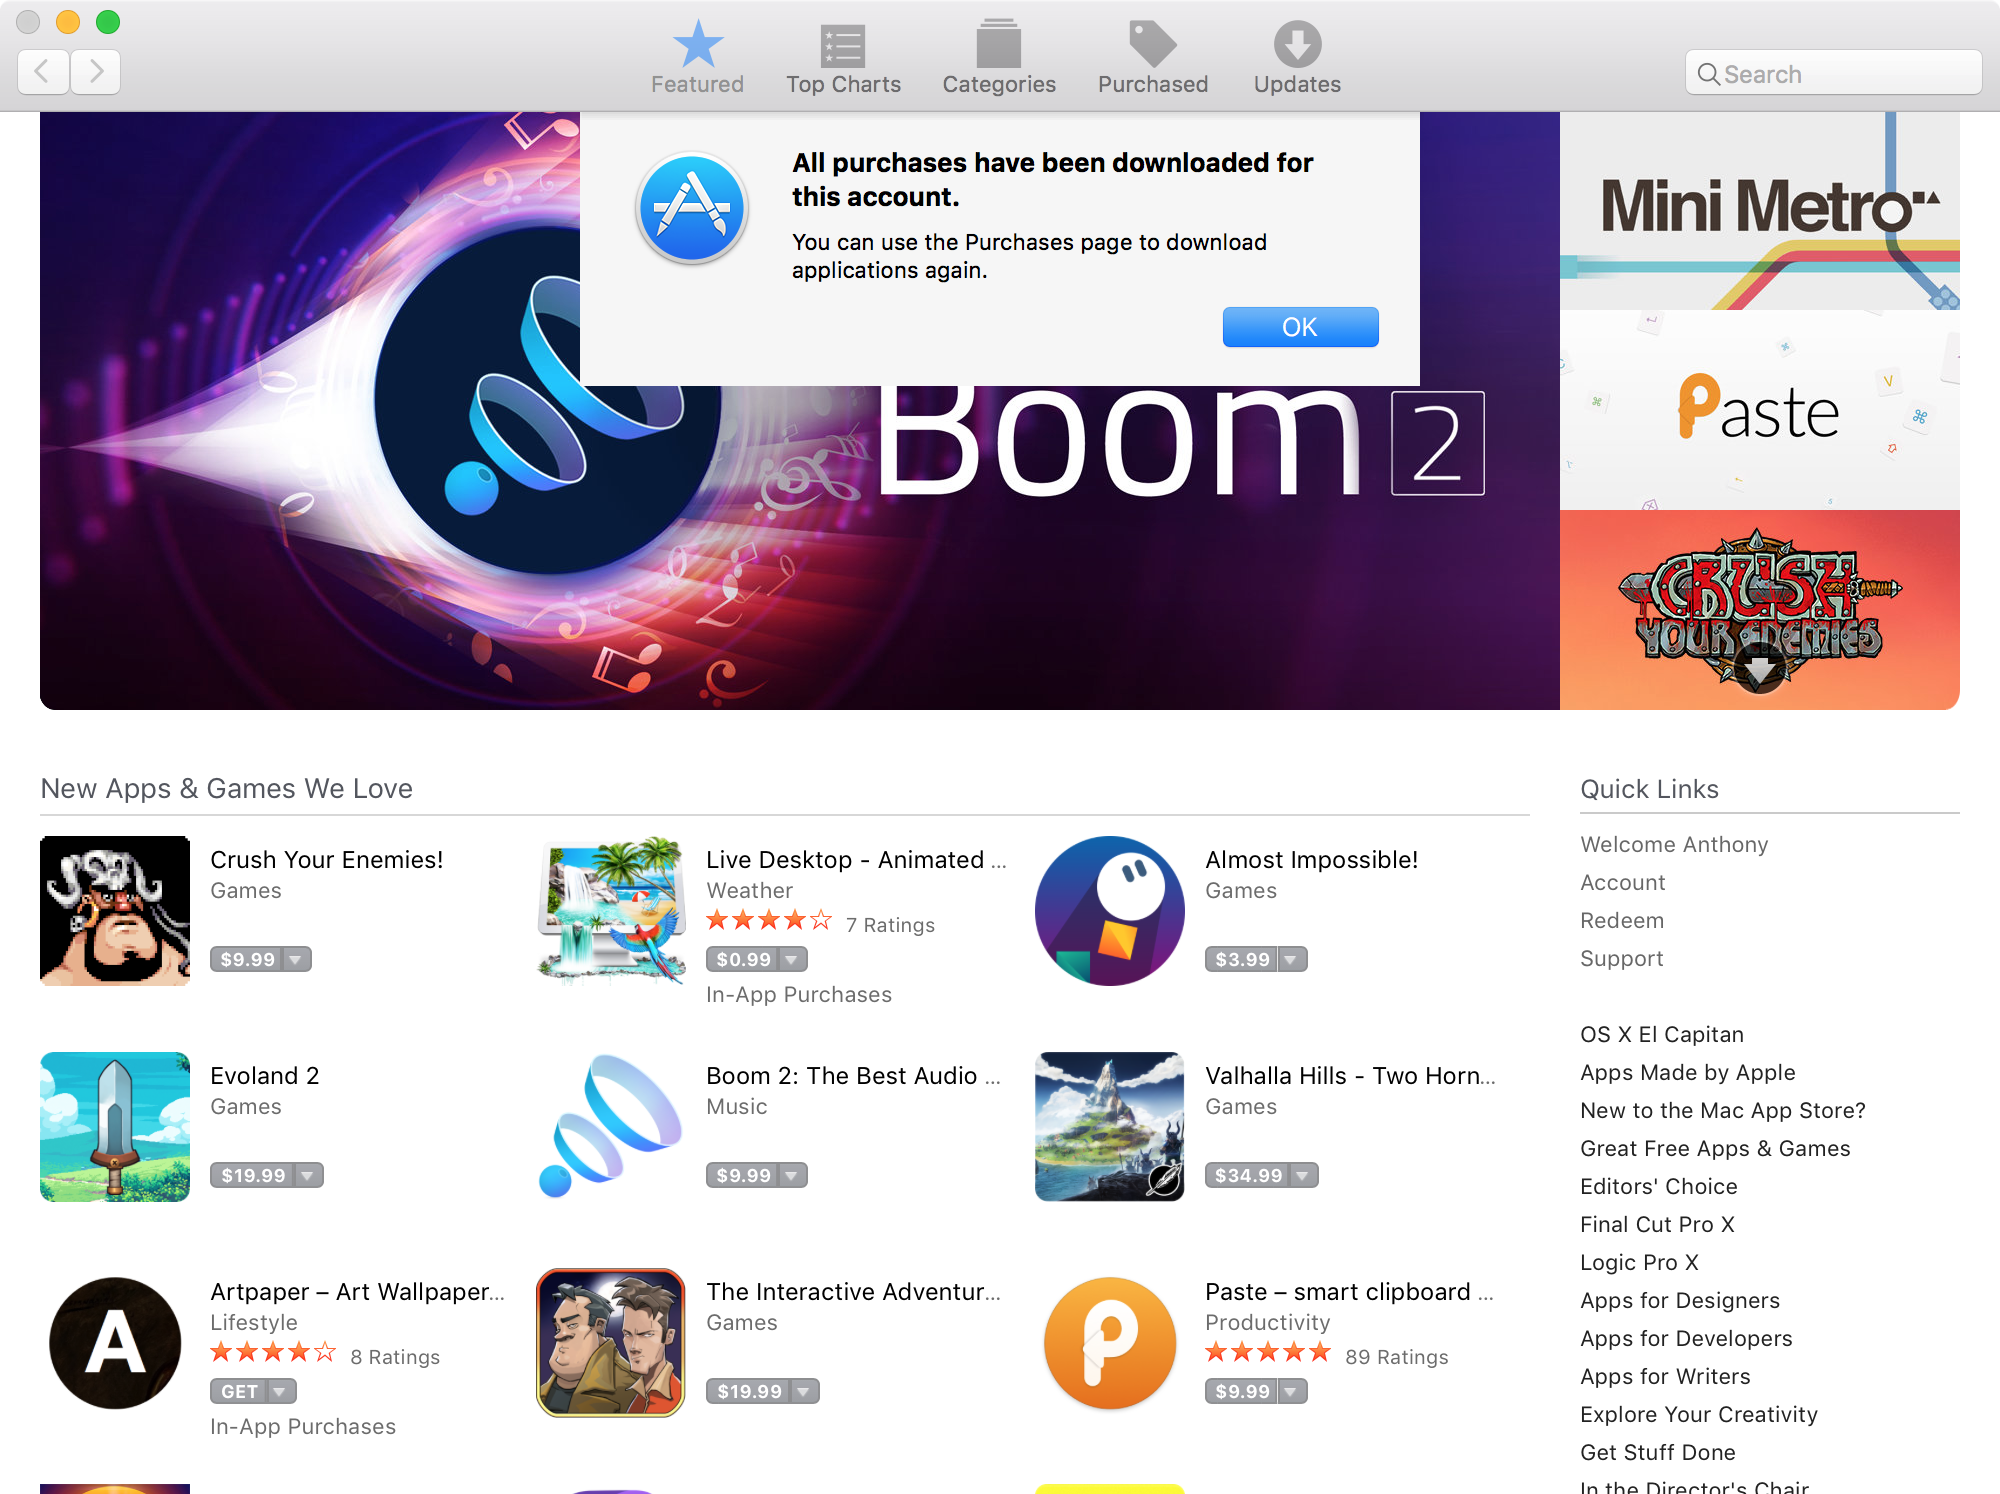 Mac App Store No Unfinished Downloads